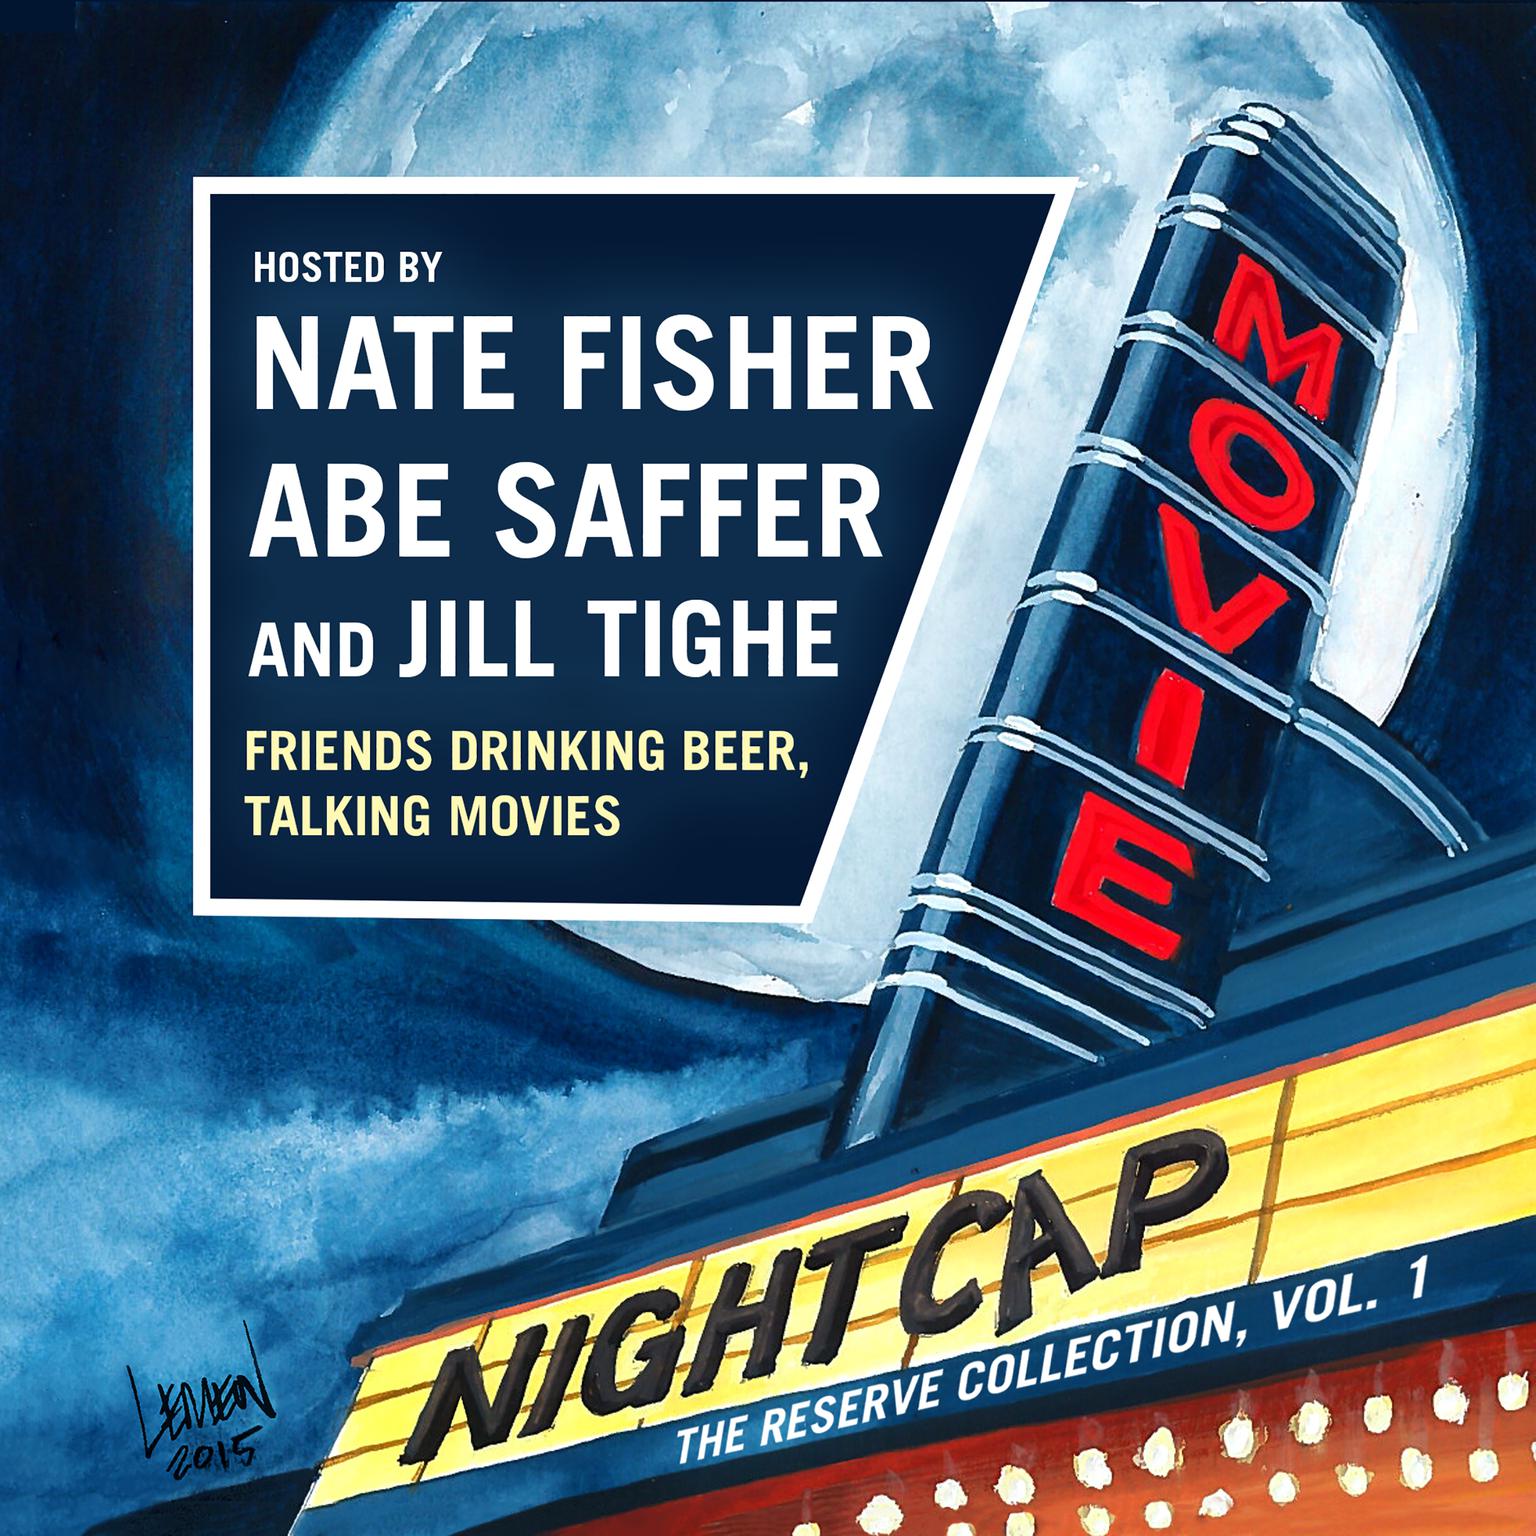 Movie Nightcap: The Reserve Collection, Vol. 1 Audiobook, by Nate Fisher